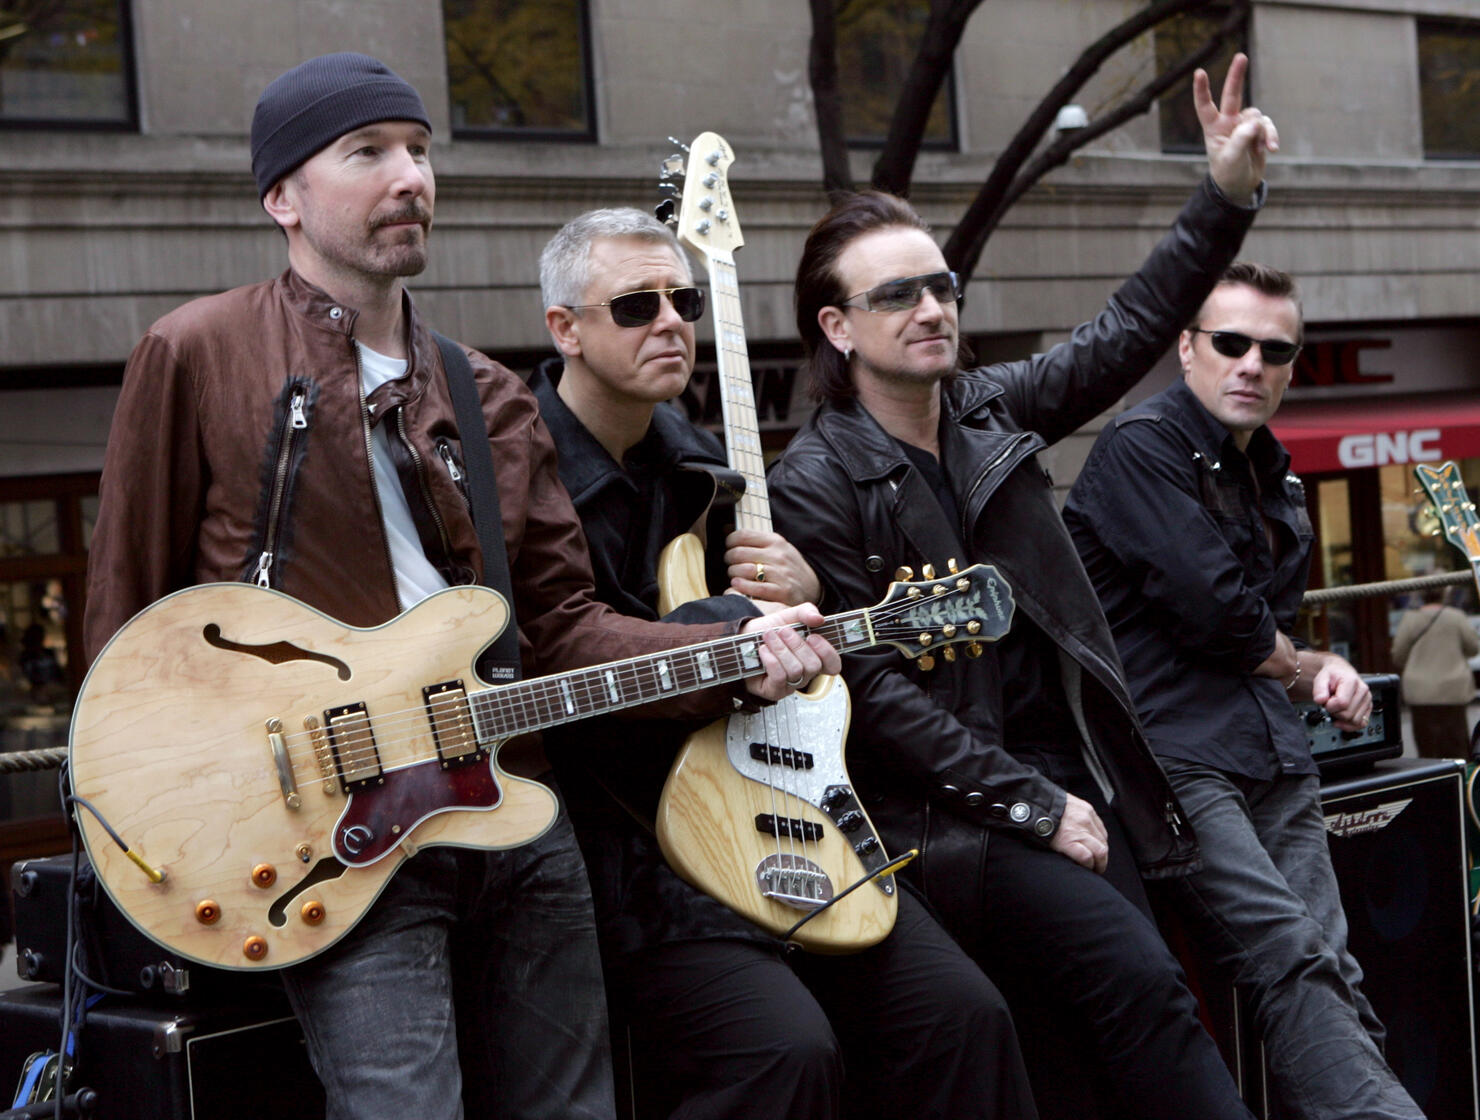 U2 Spends the Day on the Streets of New York City Shooting a Video for their New Album "How to Dismantle an Atomic Bomb" - November 22, 2004